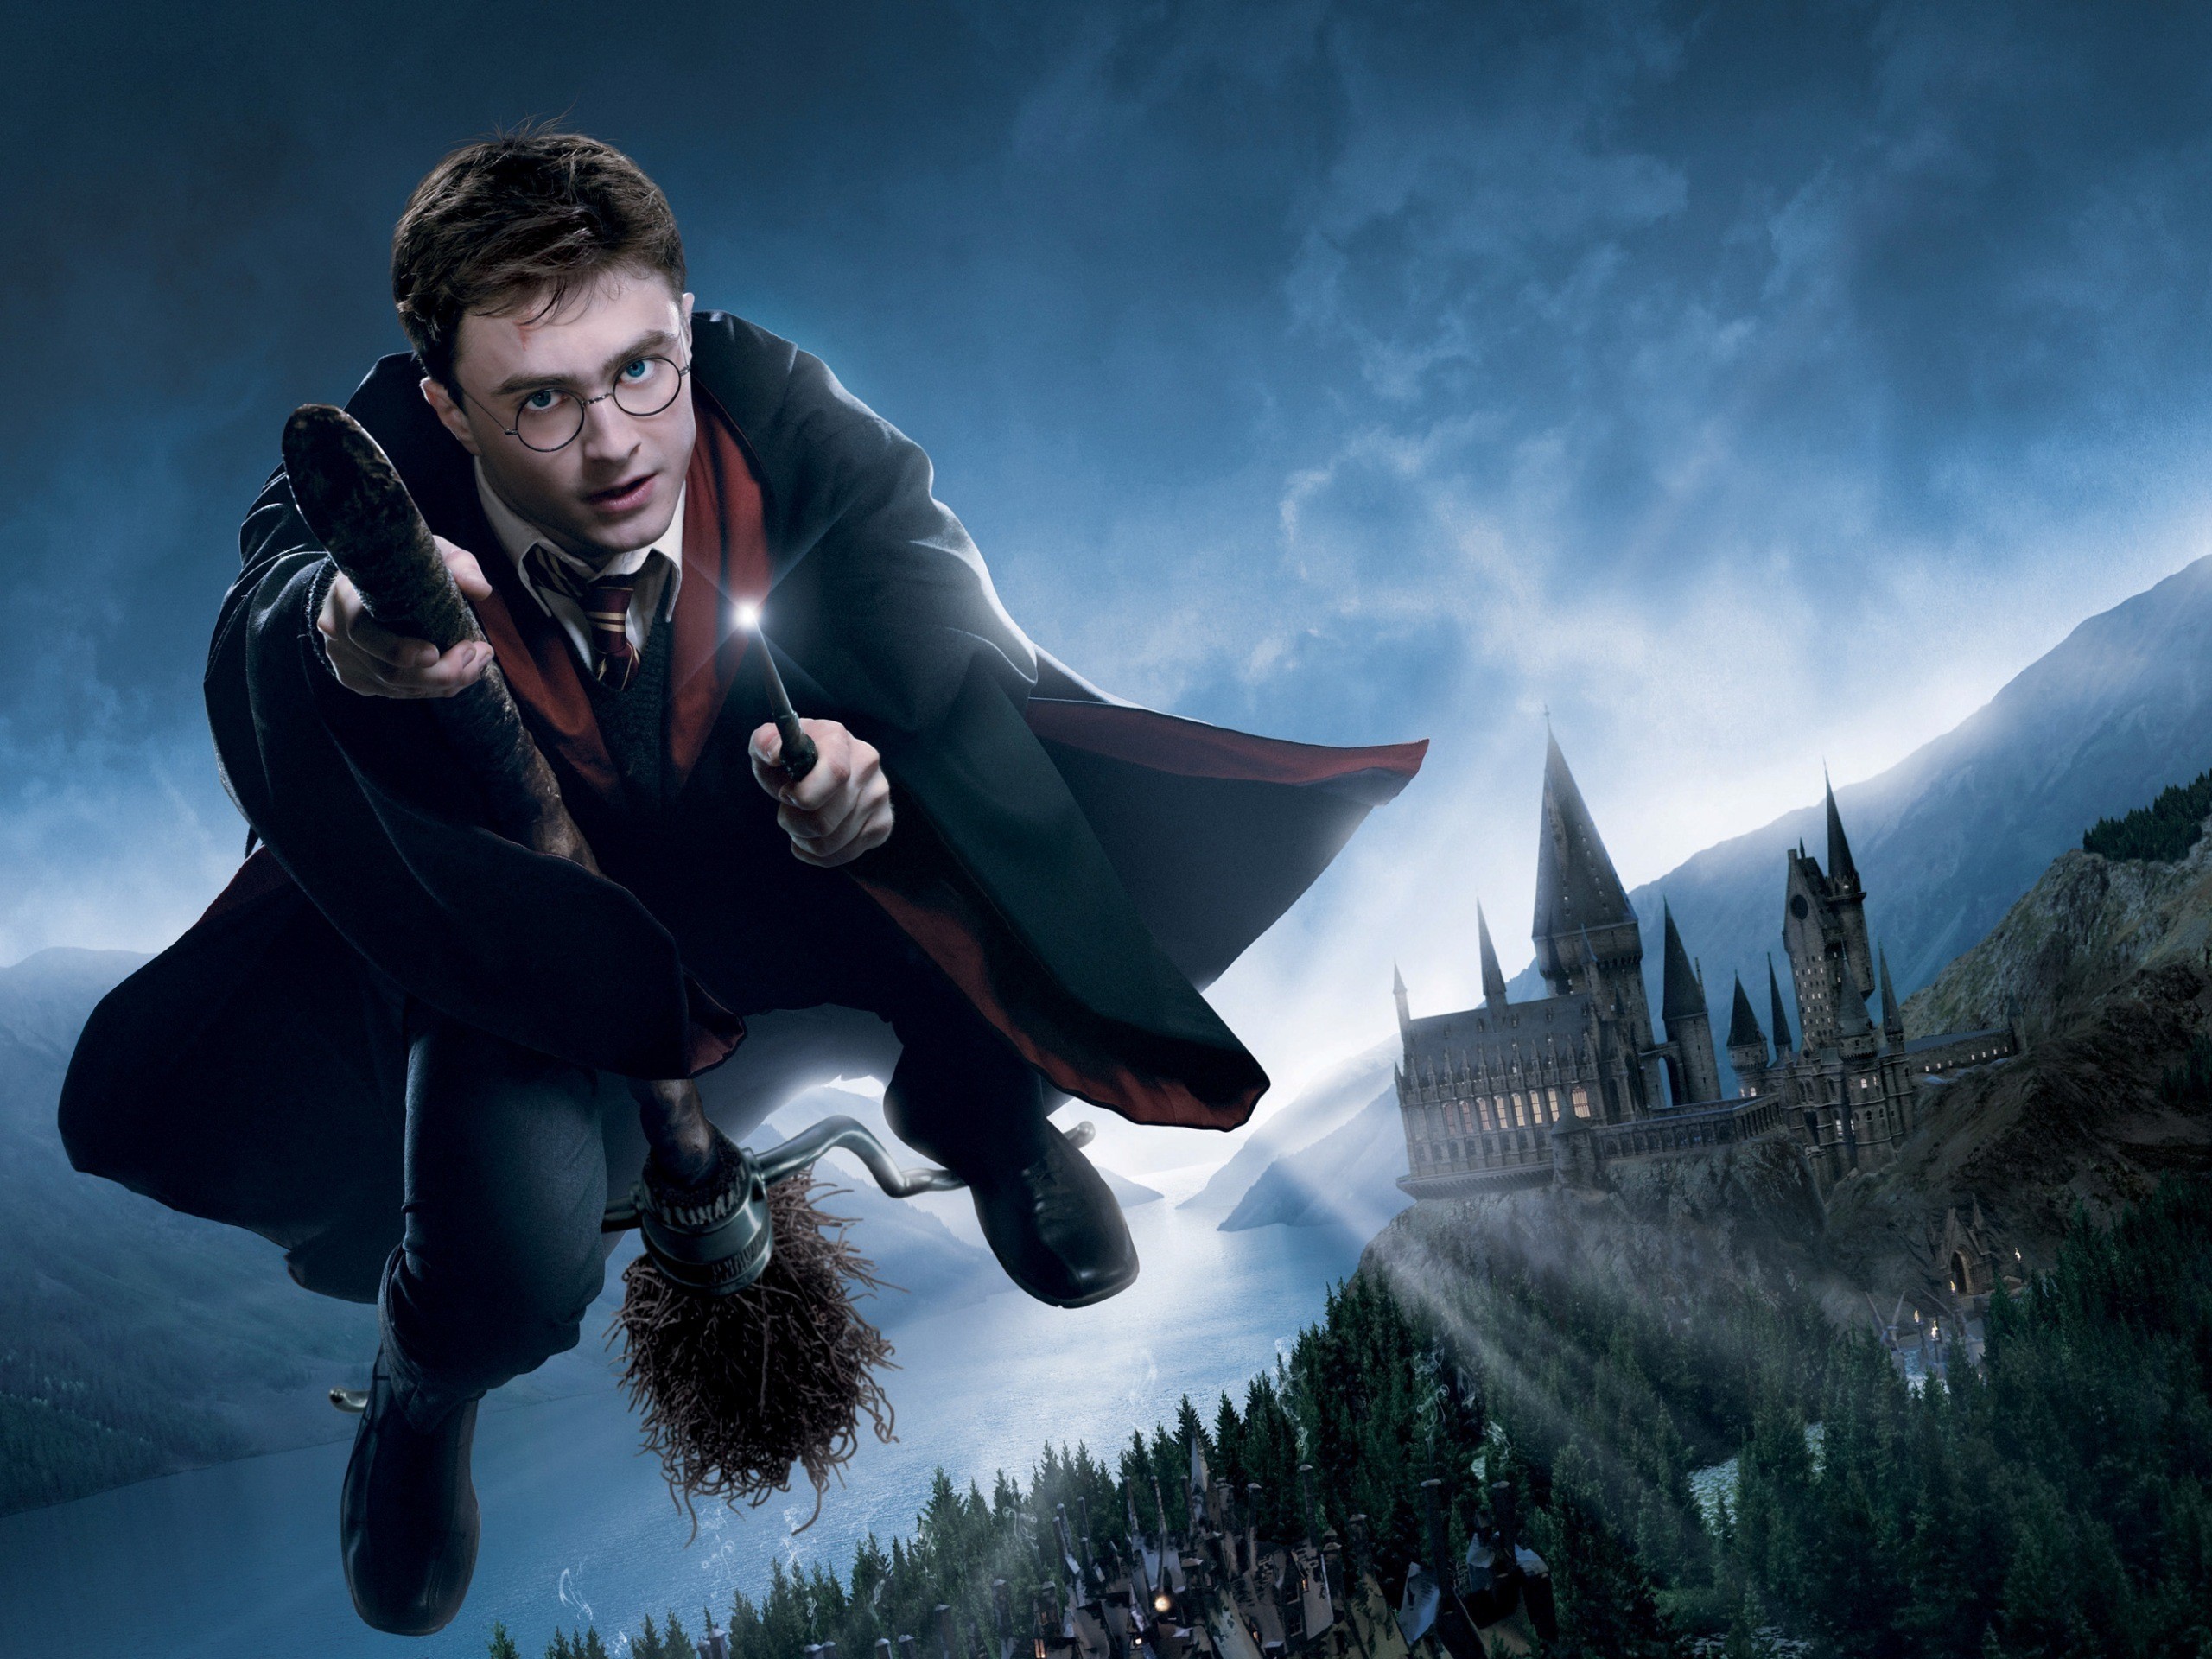 HD Wallpaper Background ID178309. Movie Harry Potter